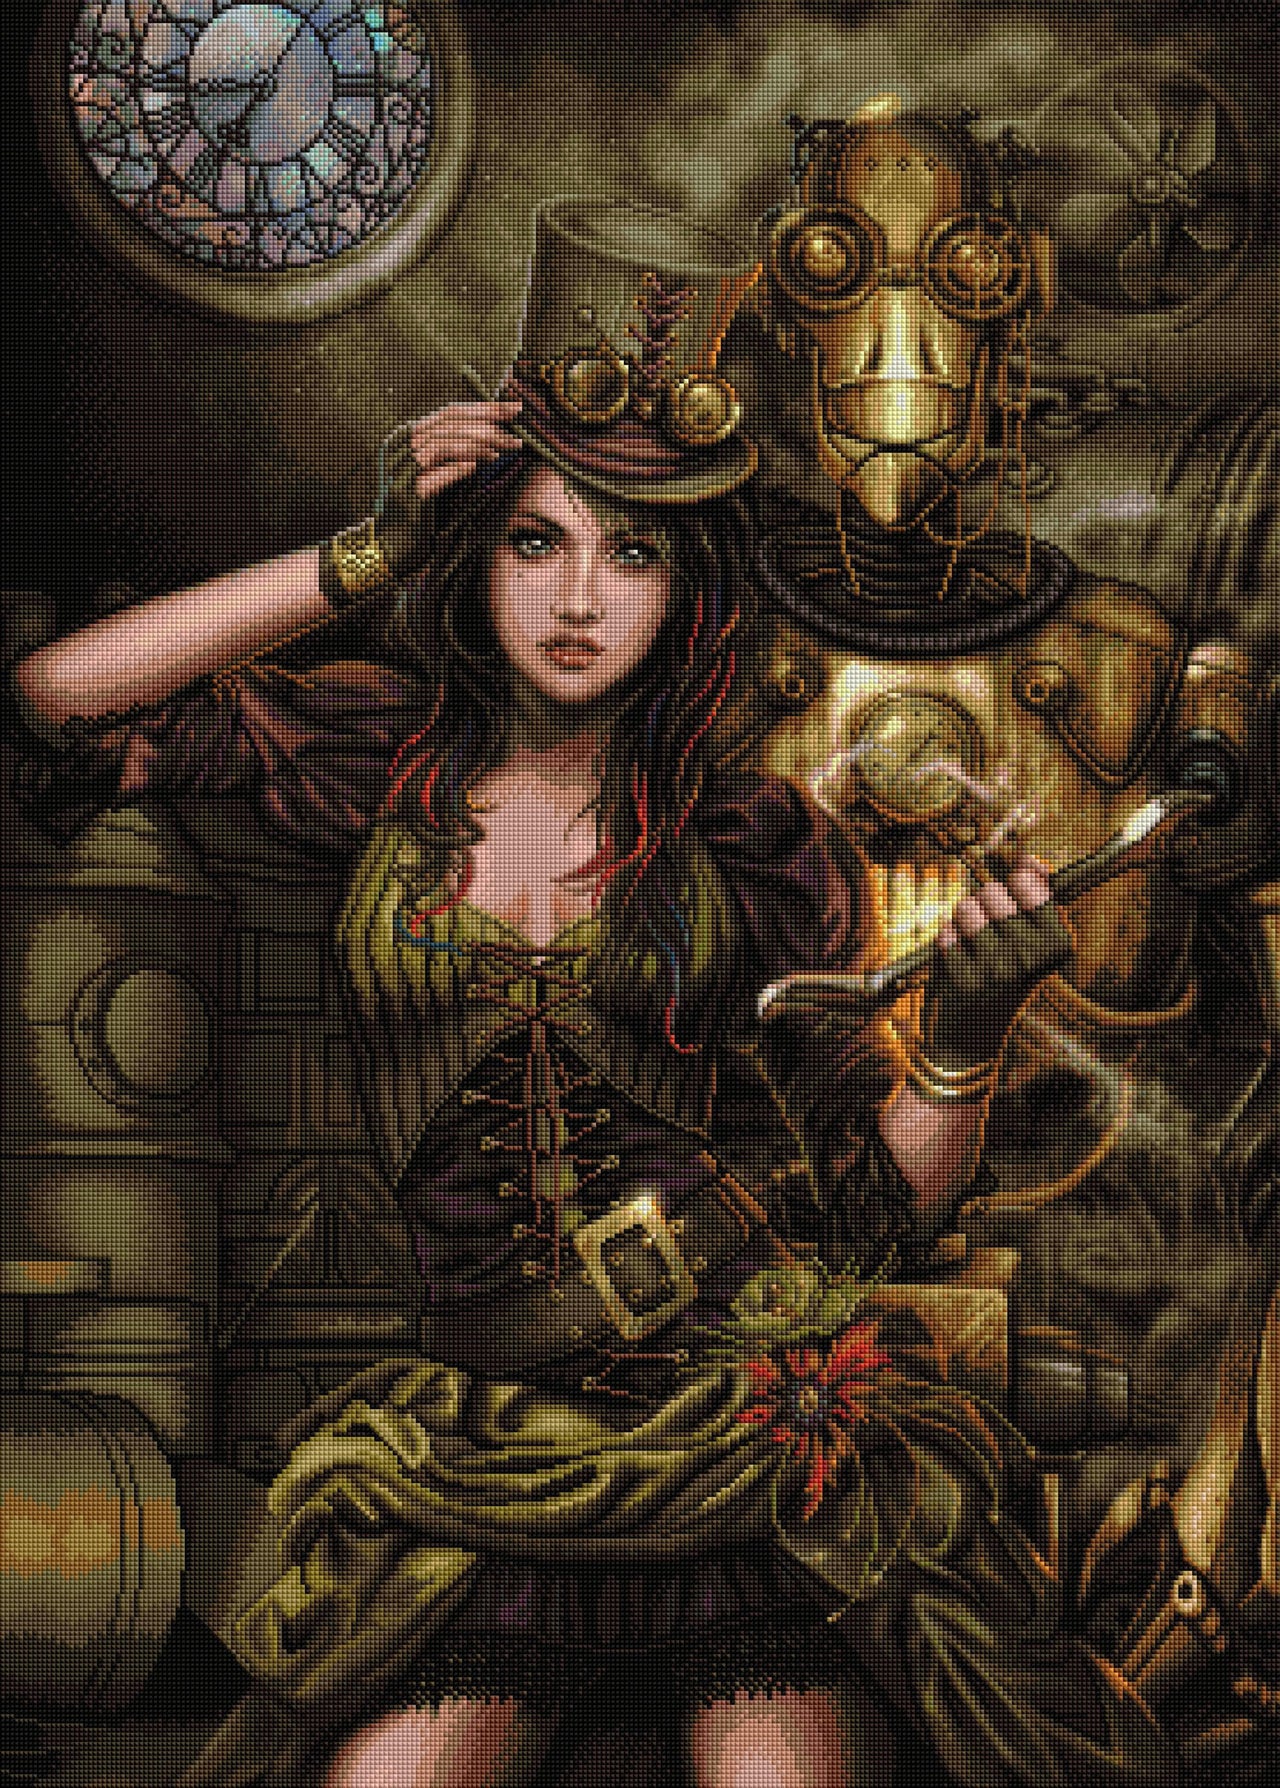 Diamond Painting Steampunk Prowess 27.1" x 37.9" (68.9cm x 96.3cm) / Square With 65 Colors Including 2 ABs / 107,199